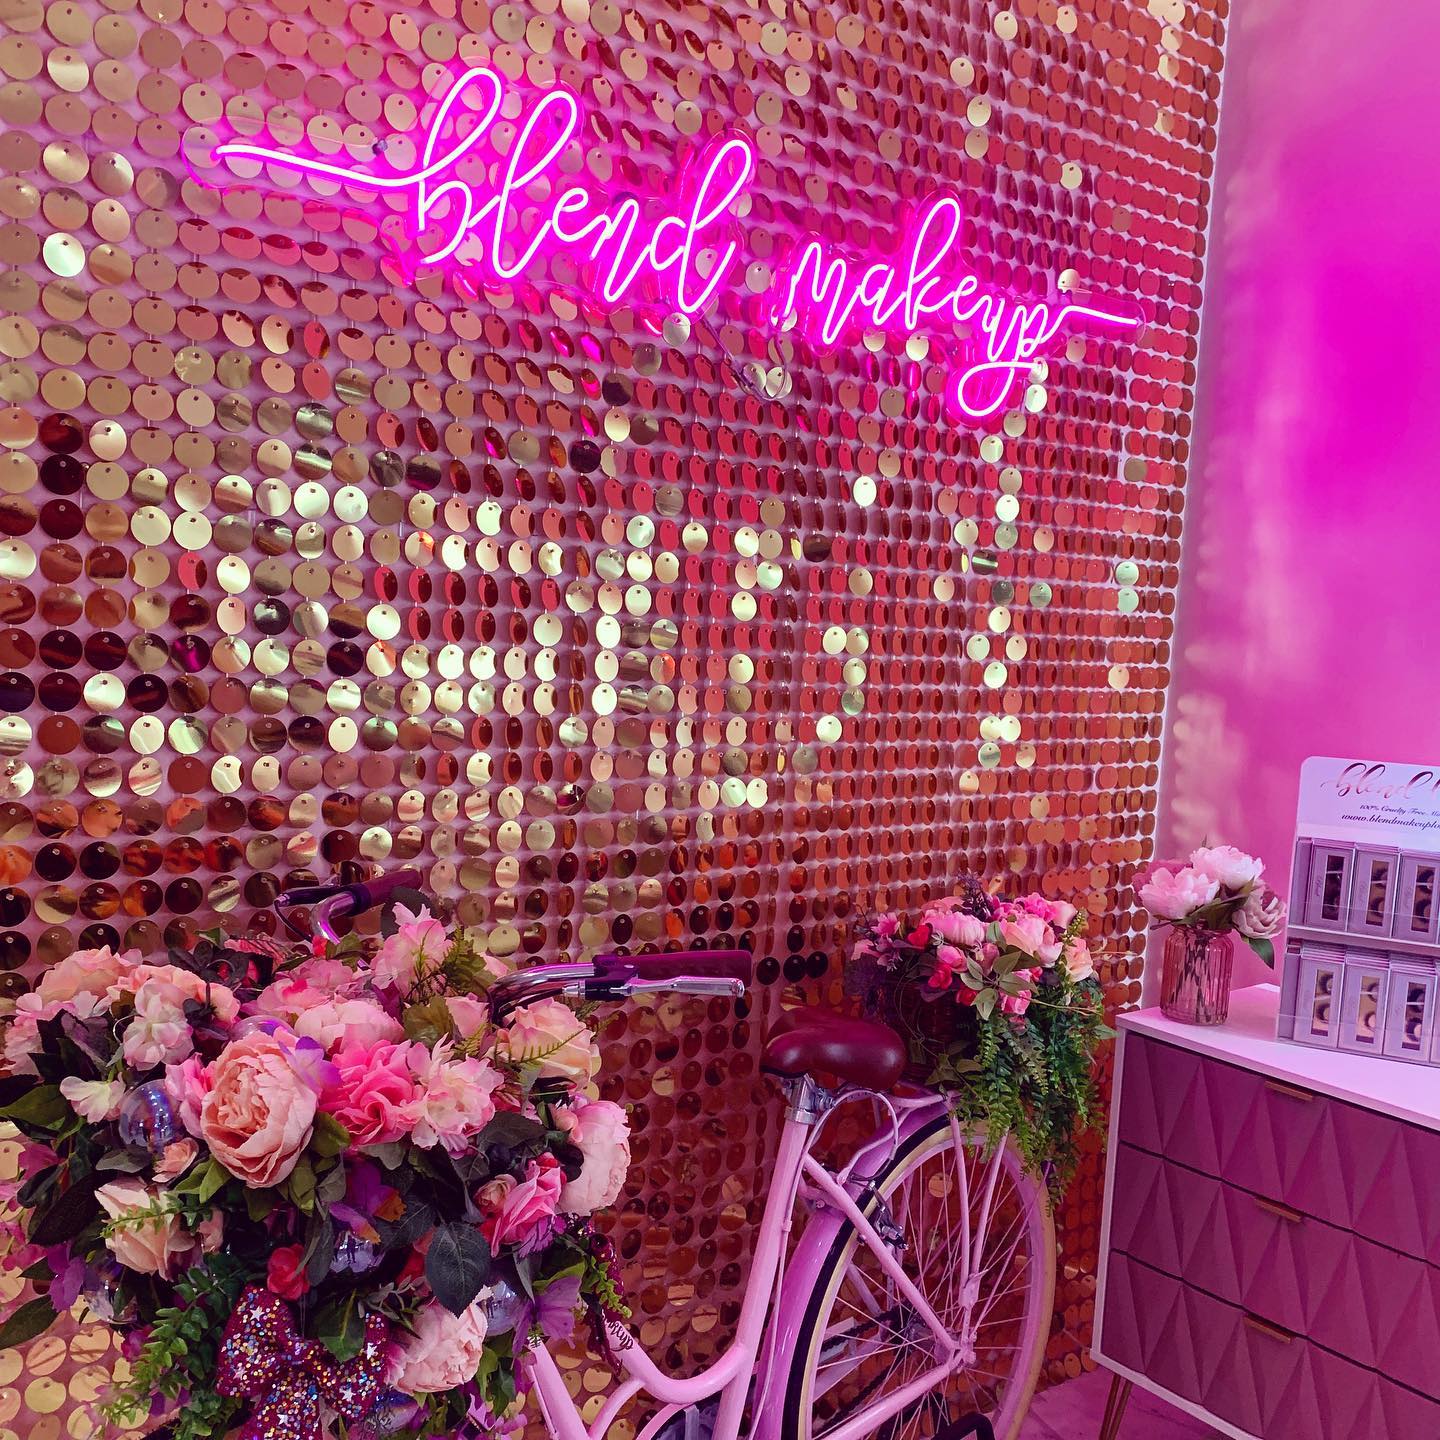 Custom Business Neon Signs for Beauty Shop, Nail Shop, Brow & Lashes Salon